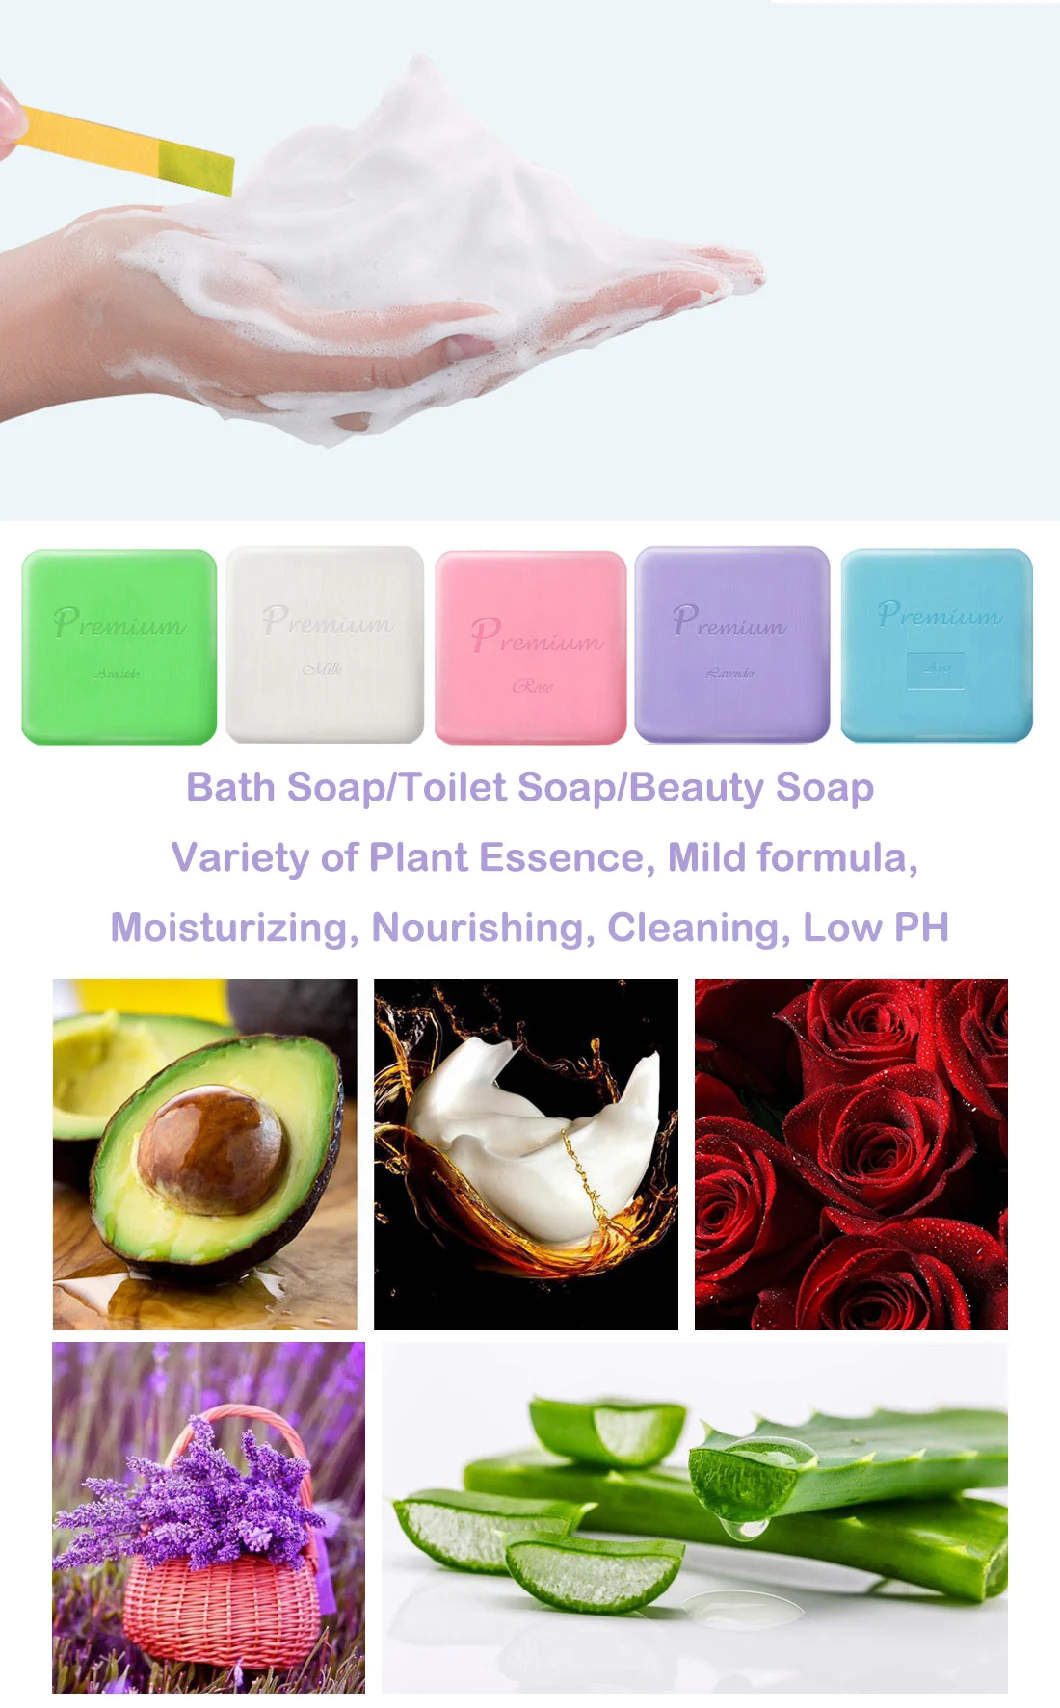 110g Rose Perfume Face Soap Bath Soap Beauty Soap in Brilliant Shape and Bright Colors